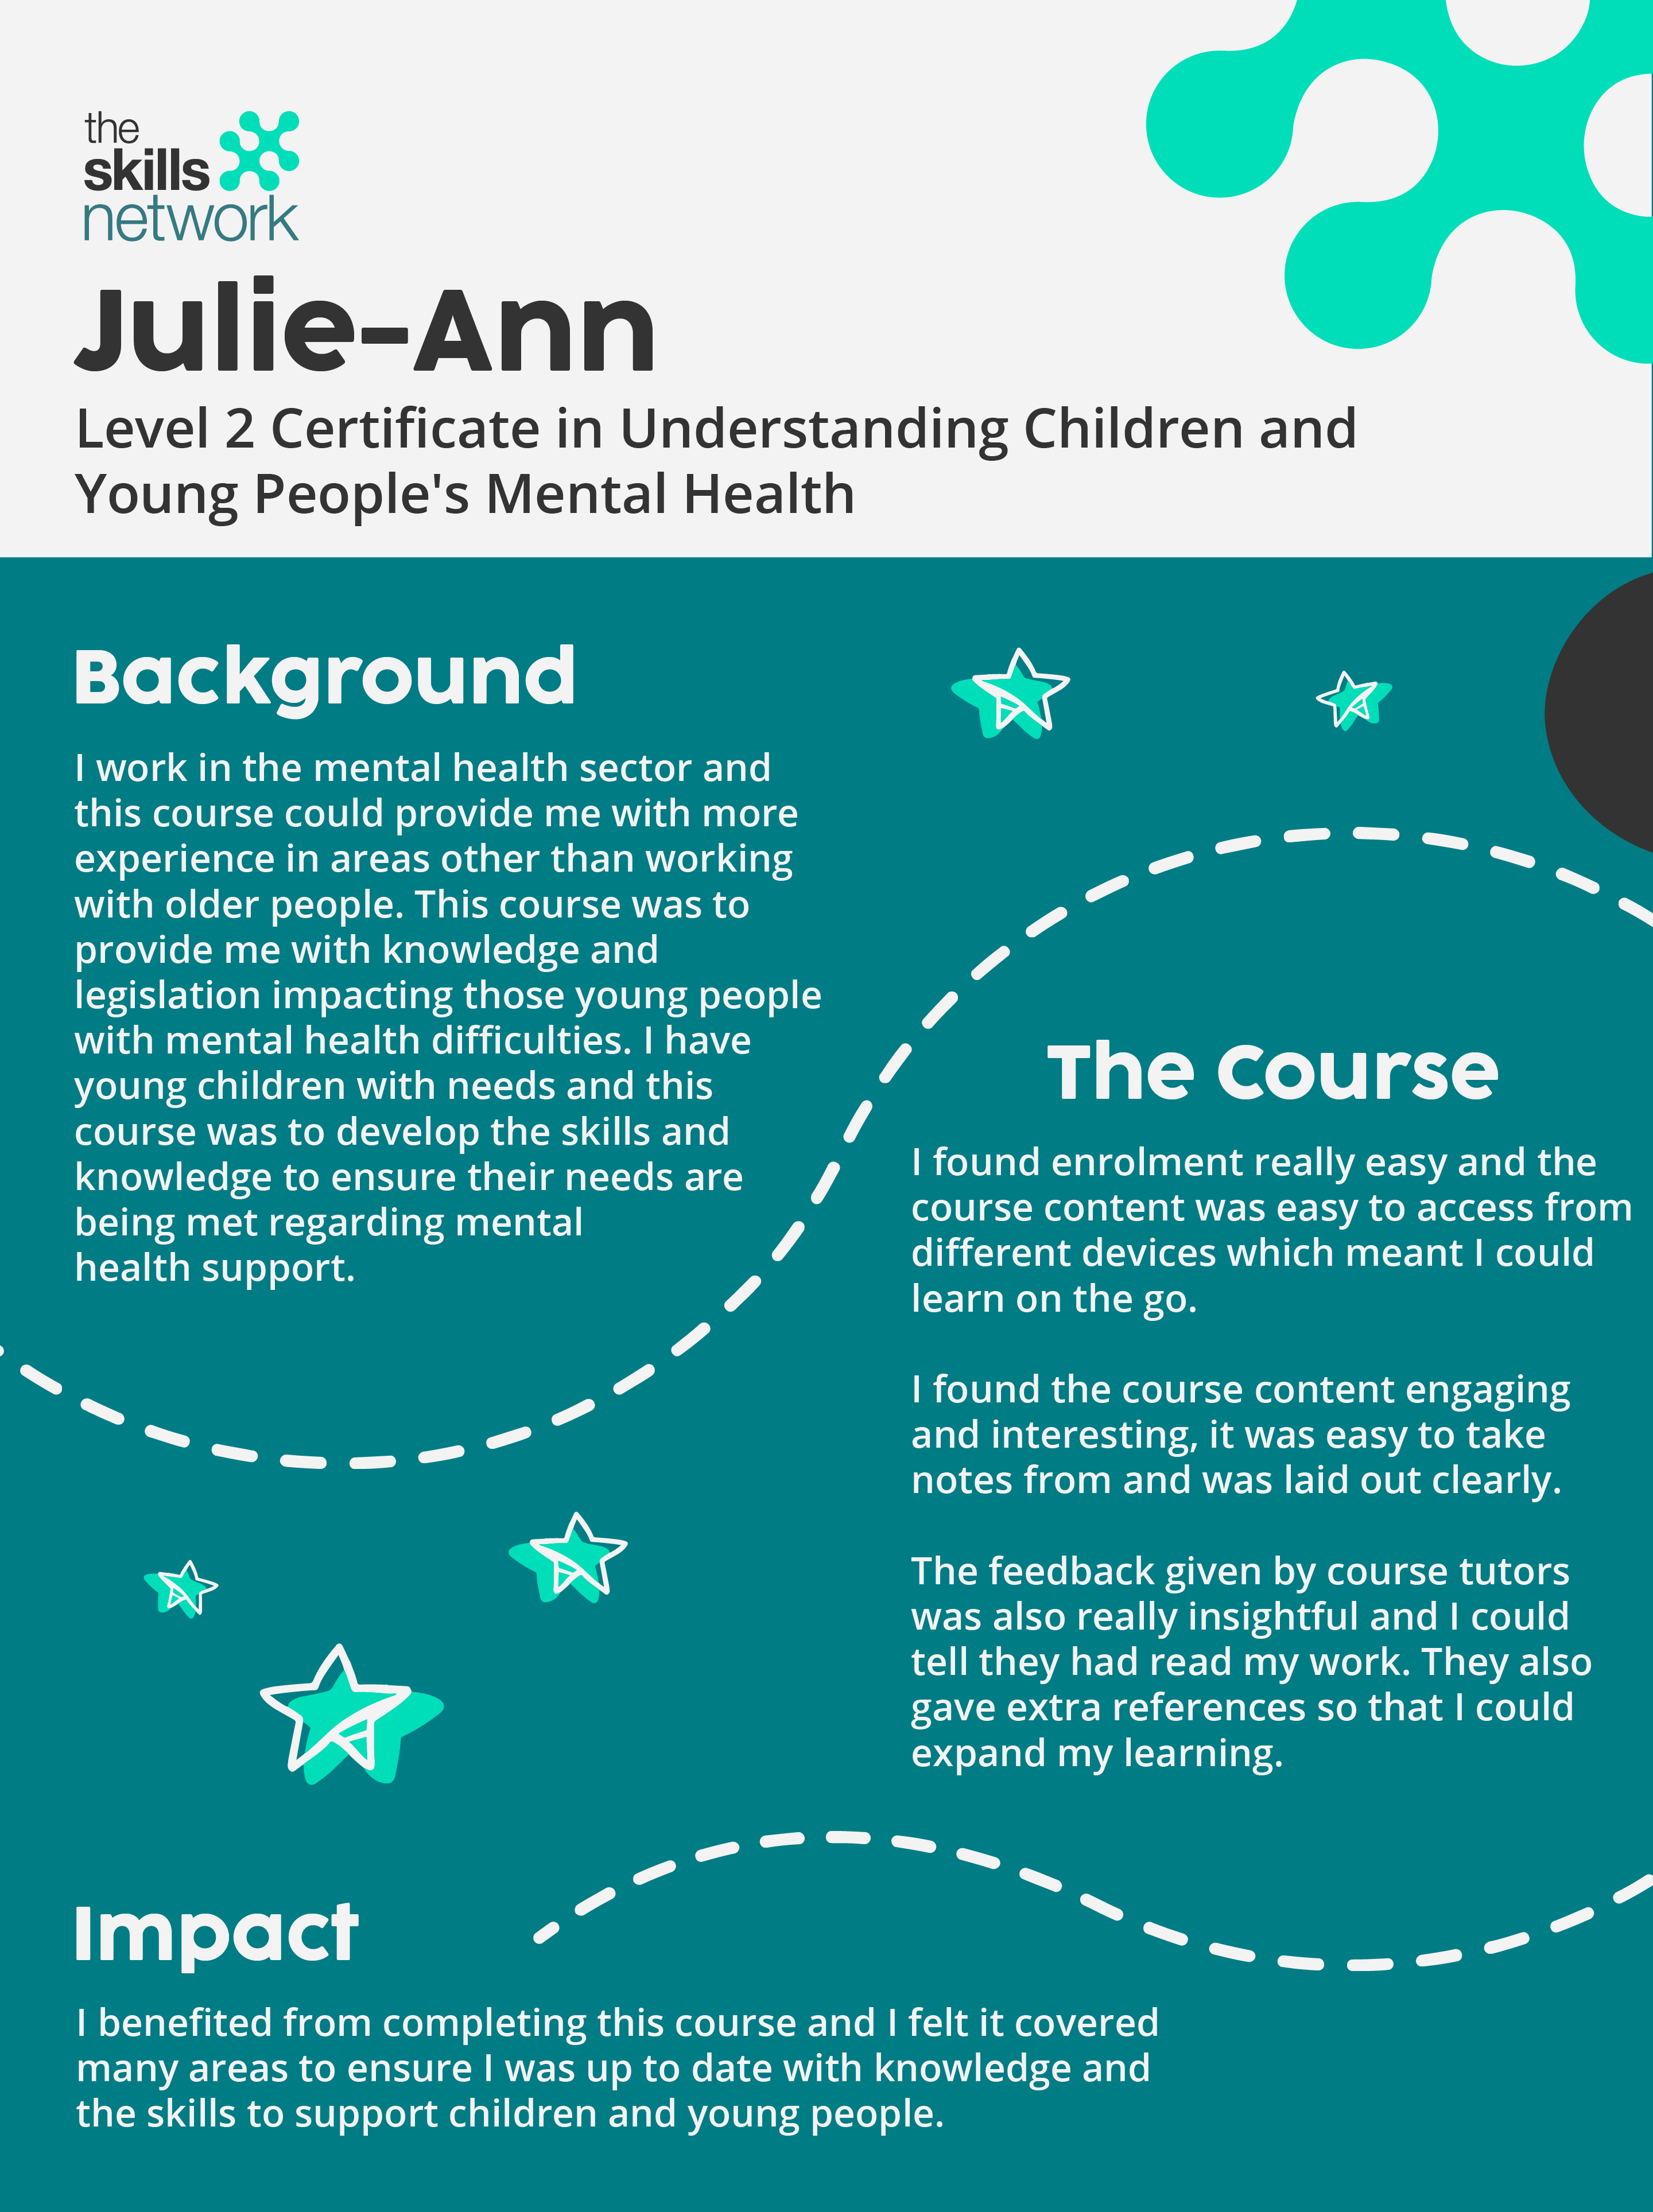 Level 2 Certificate in Understanding Children and Young Peoples' Mental Health